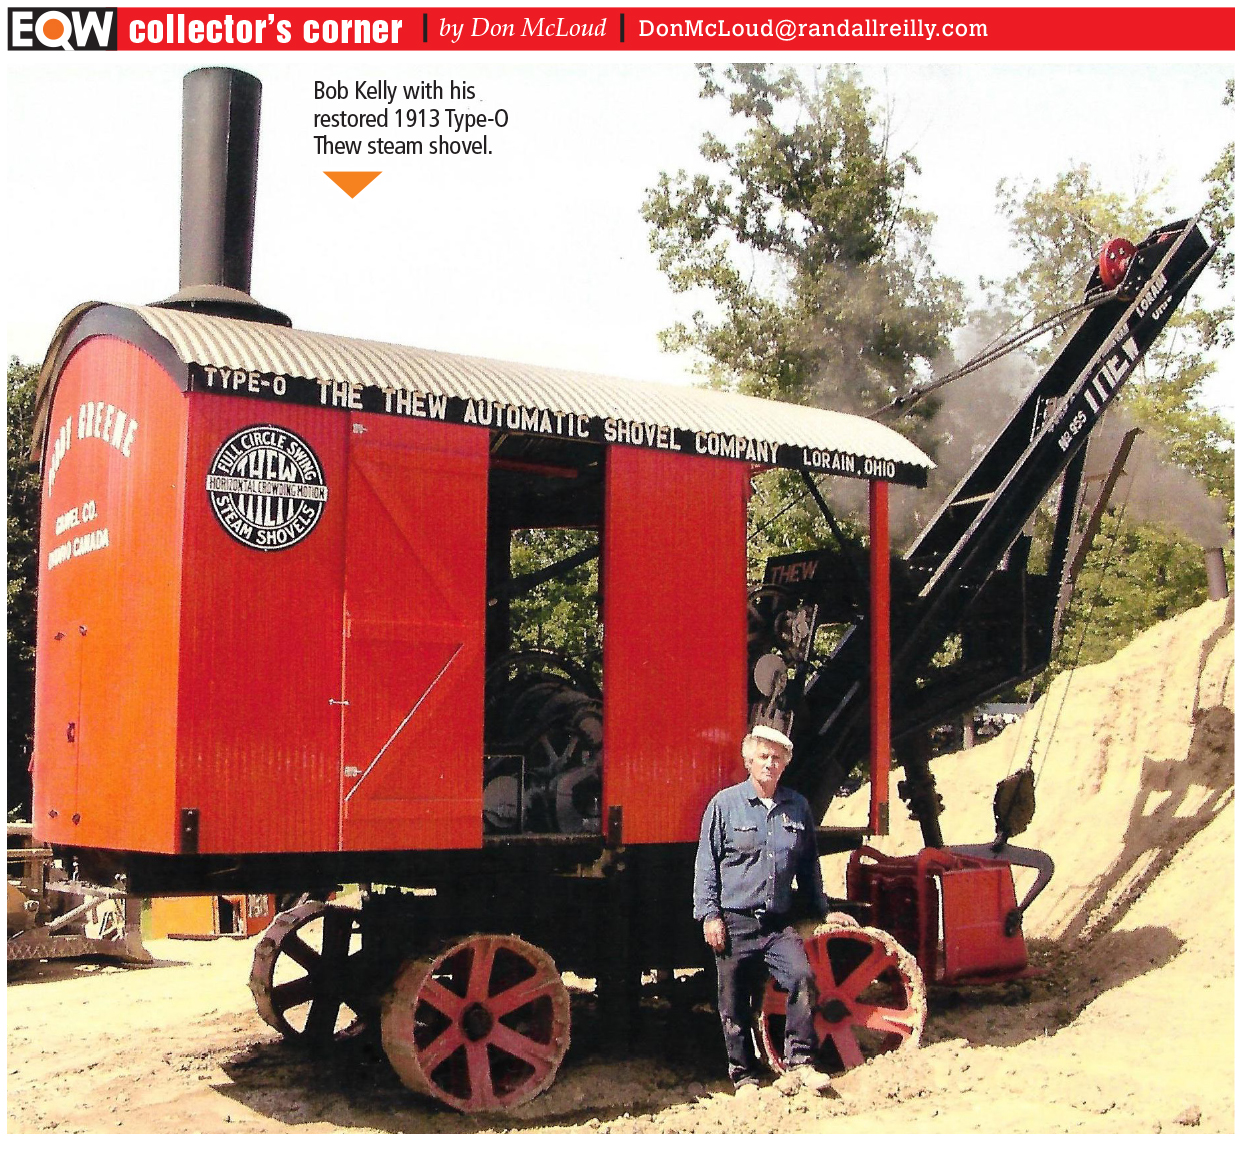 Bob Kelly with restored 1913 Type-O Thew steam shovel